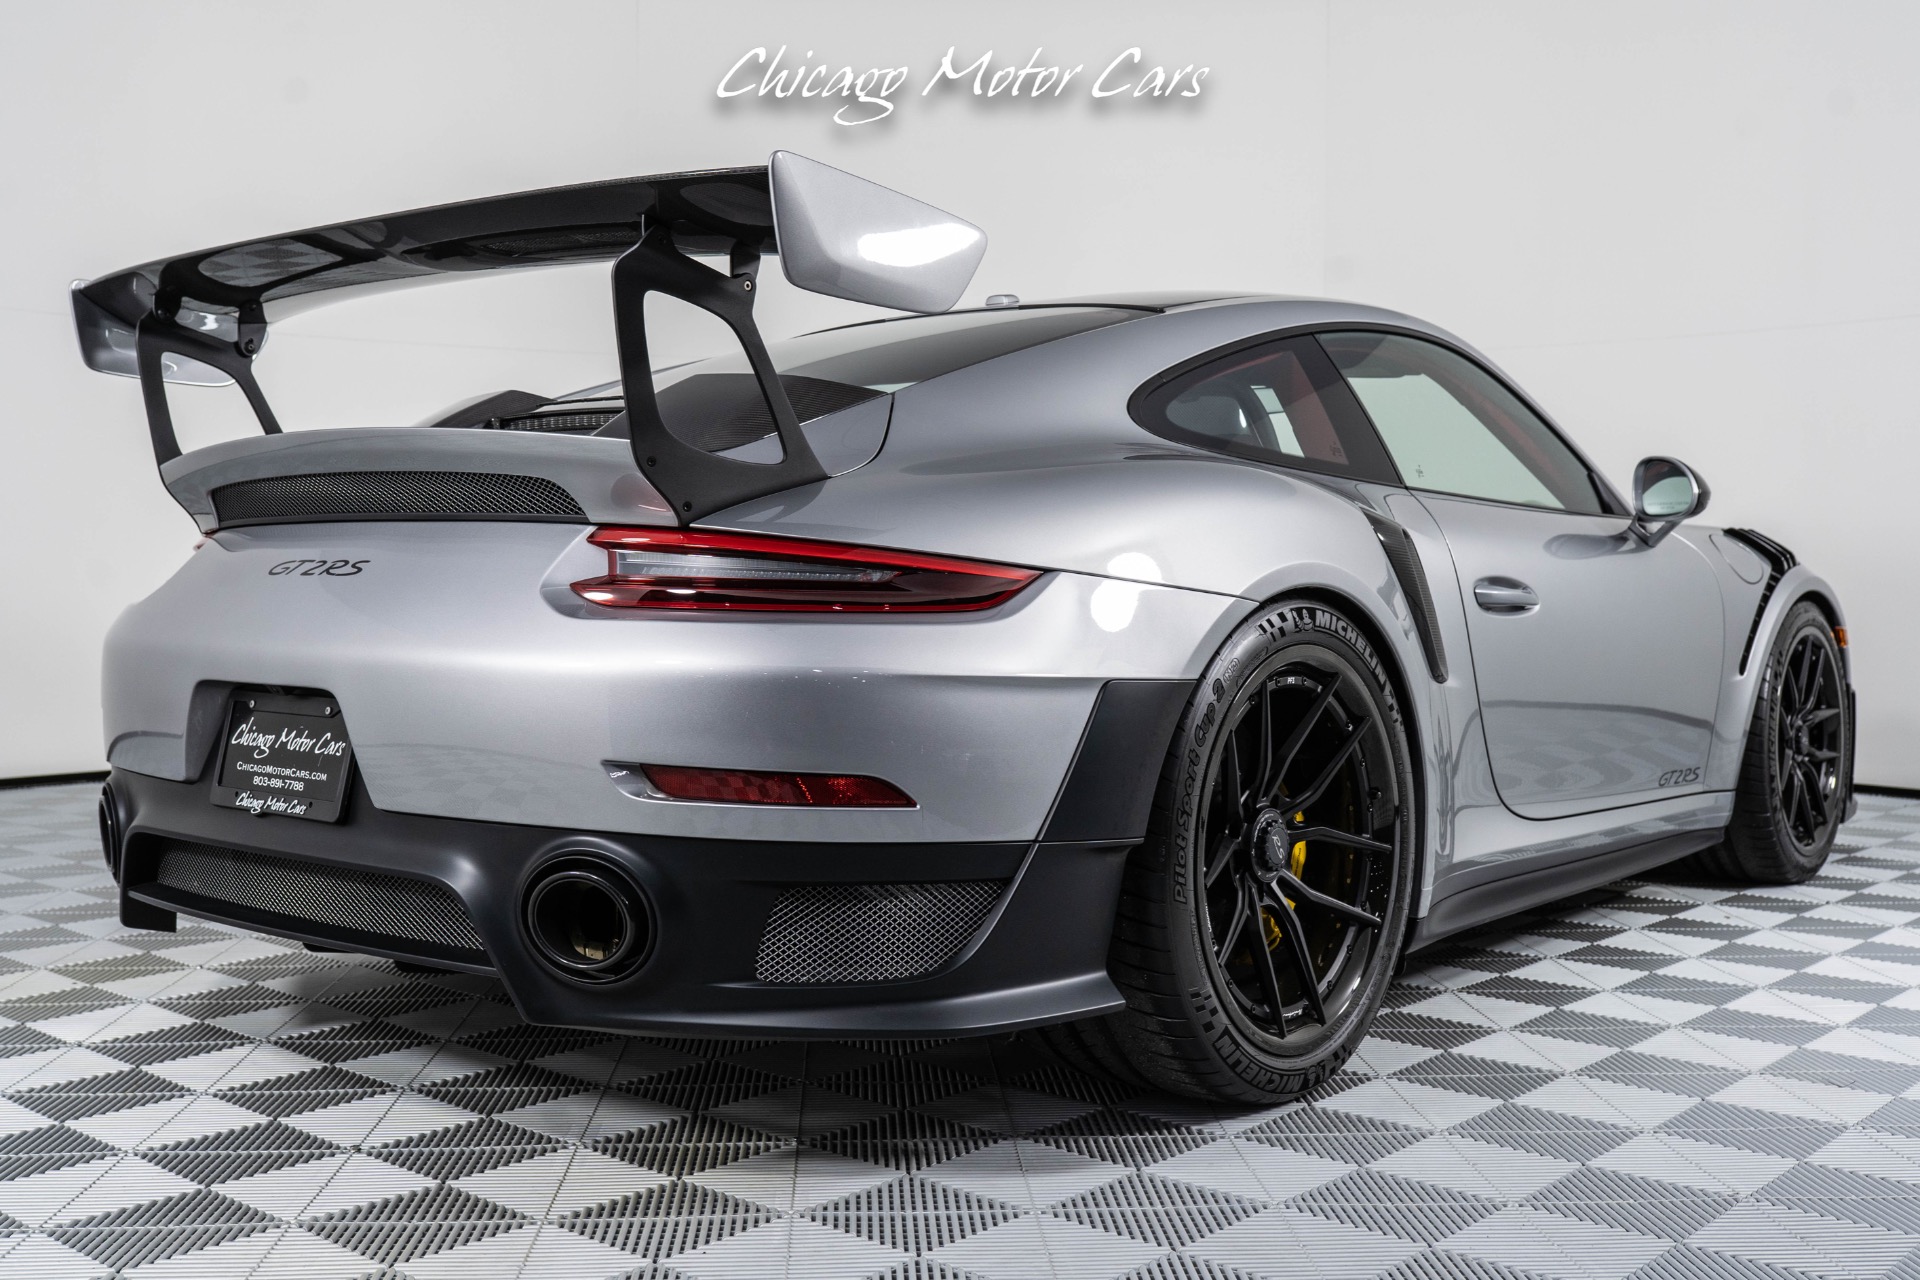 Used-2019-Porsche-911-GT2-RS-Weissach-Package-Full-PPF-VERY-LOW-MILES-Front-Lift-Loaded